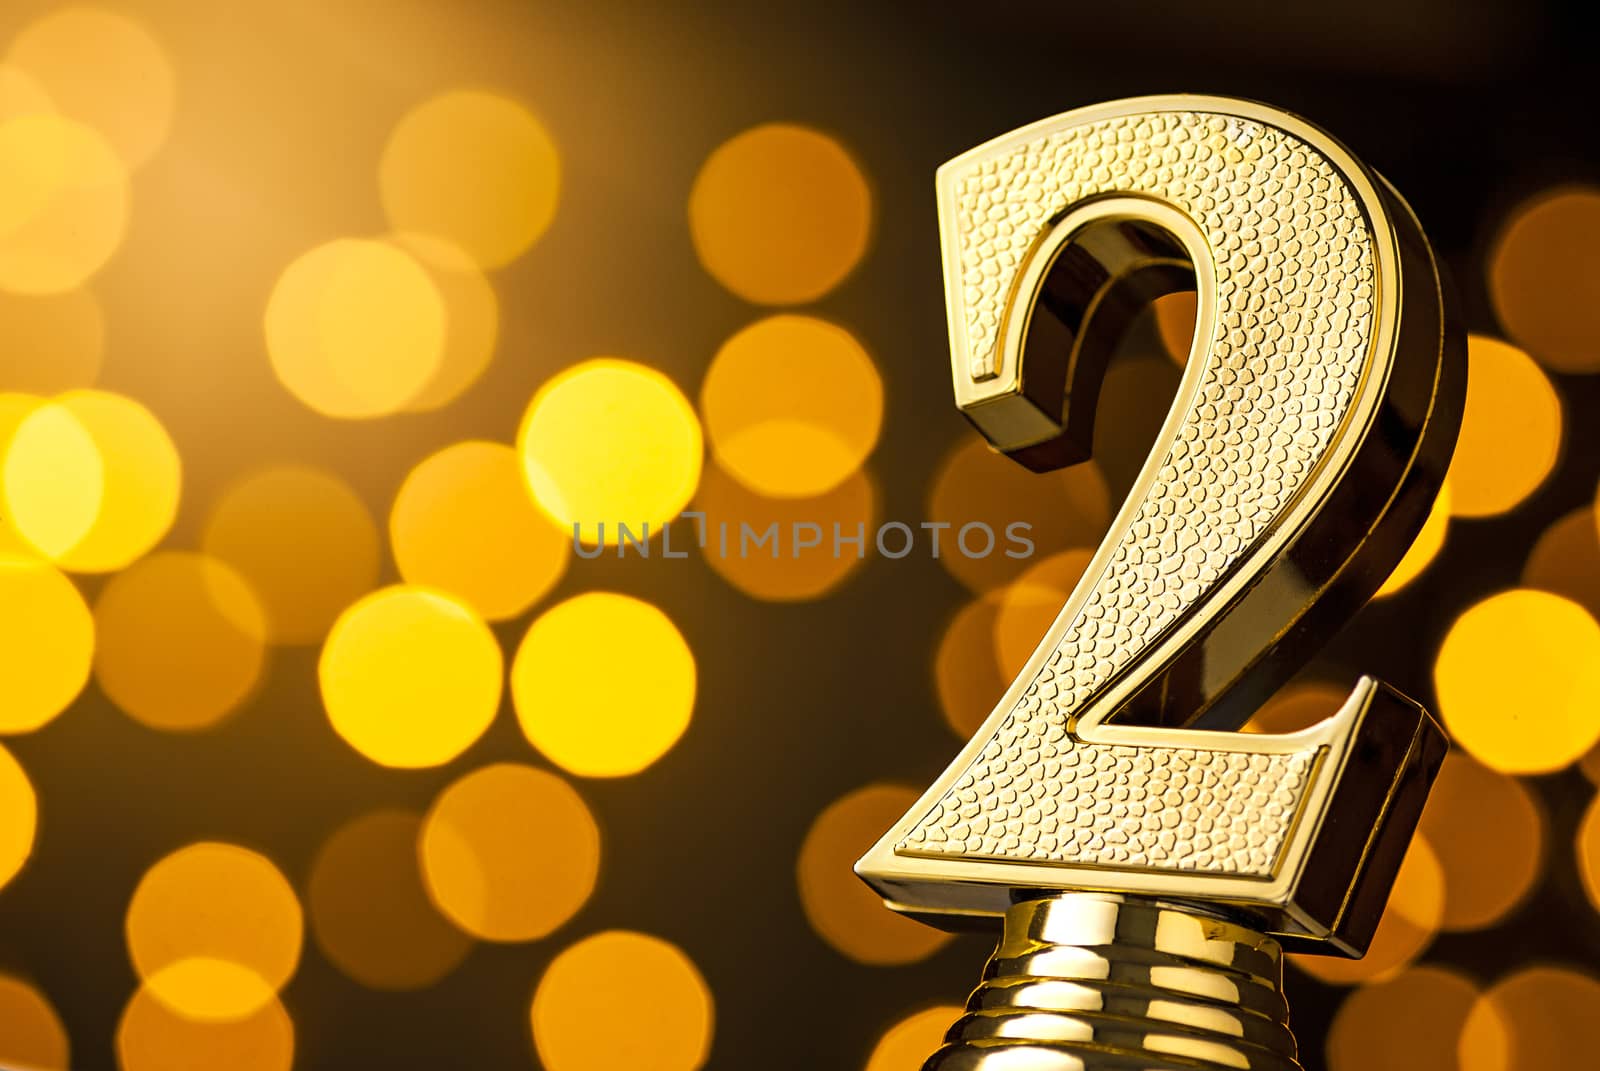 Second placed runner up gold award trophy over a festive background of golden bokeh effect party lights